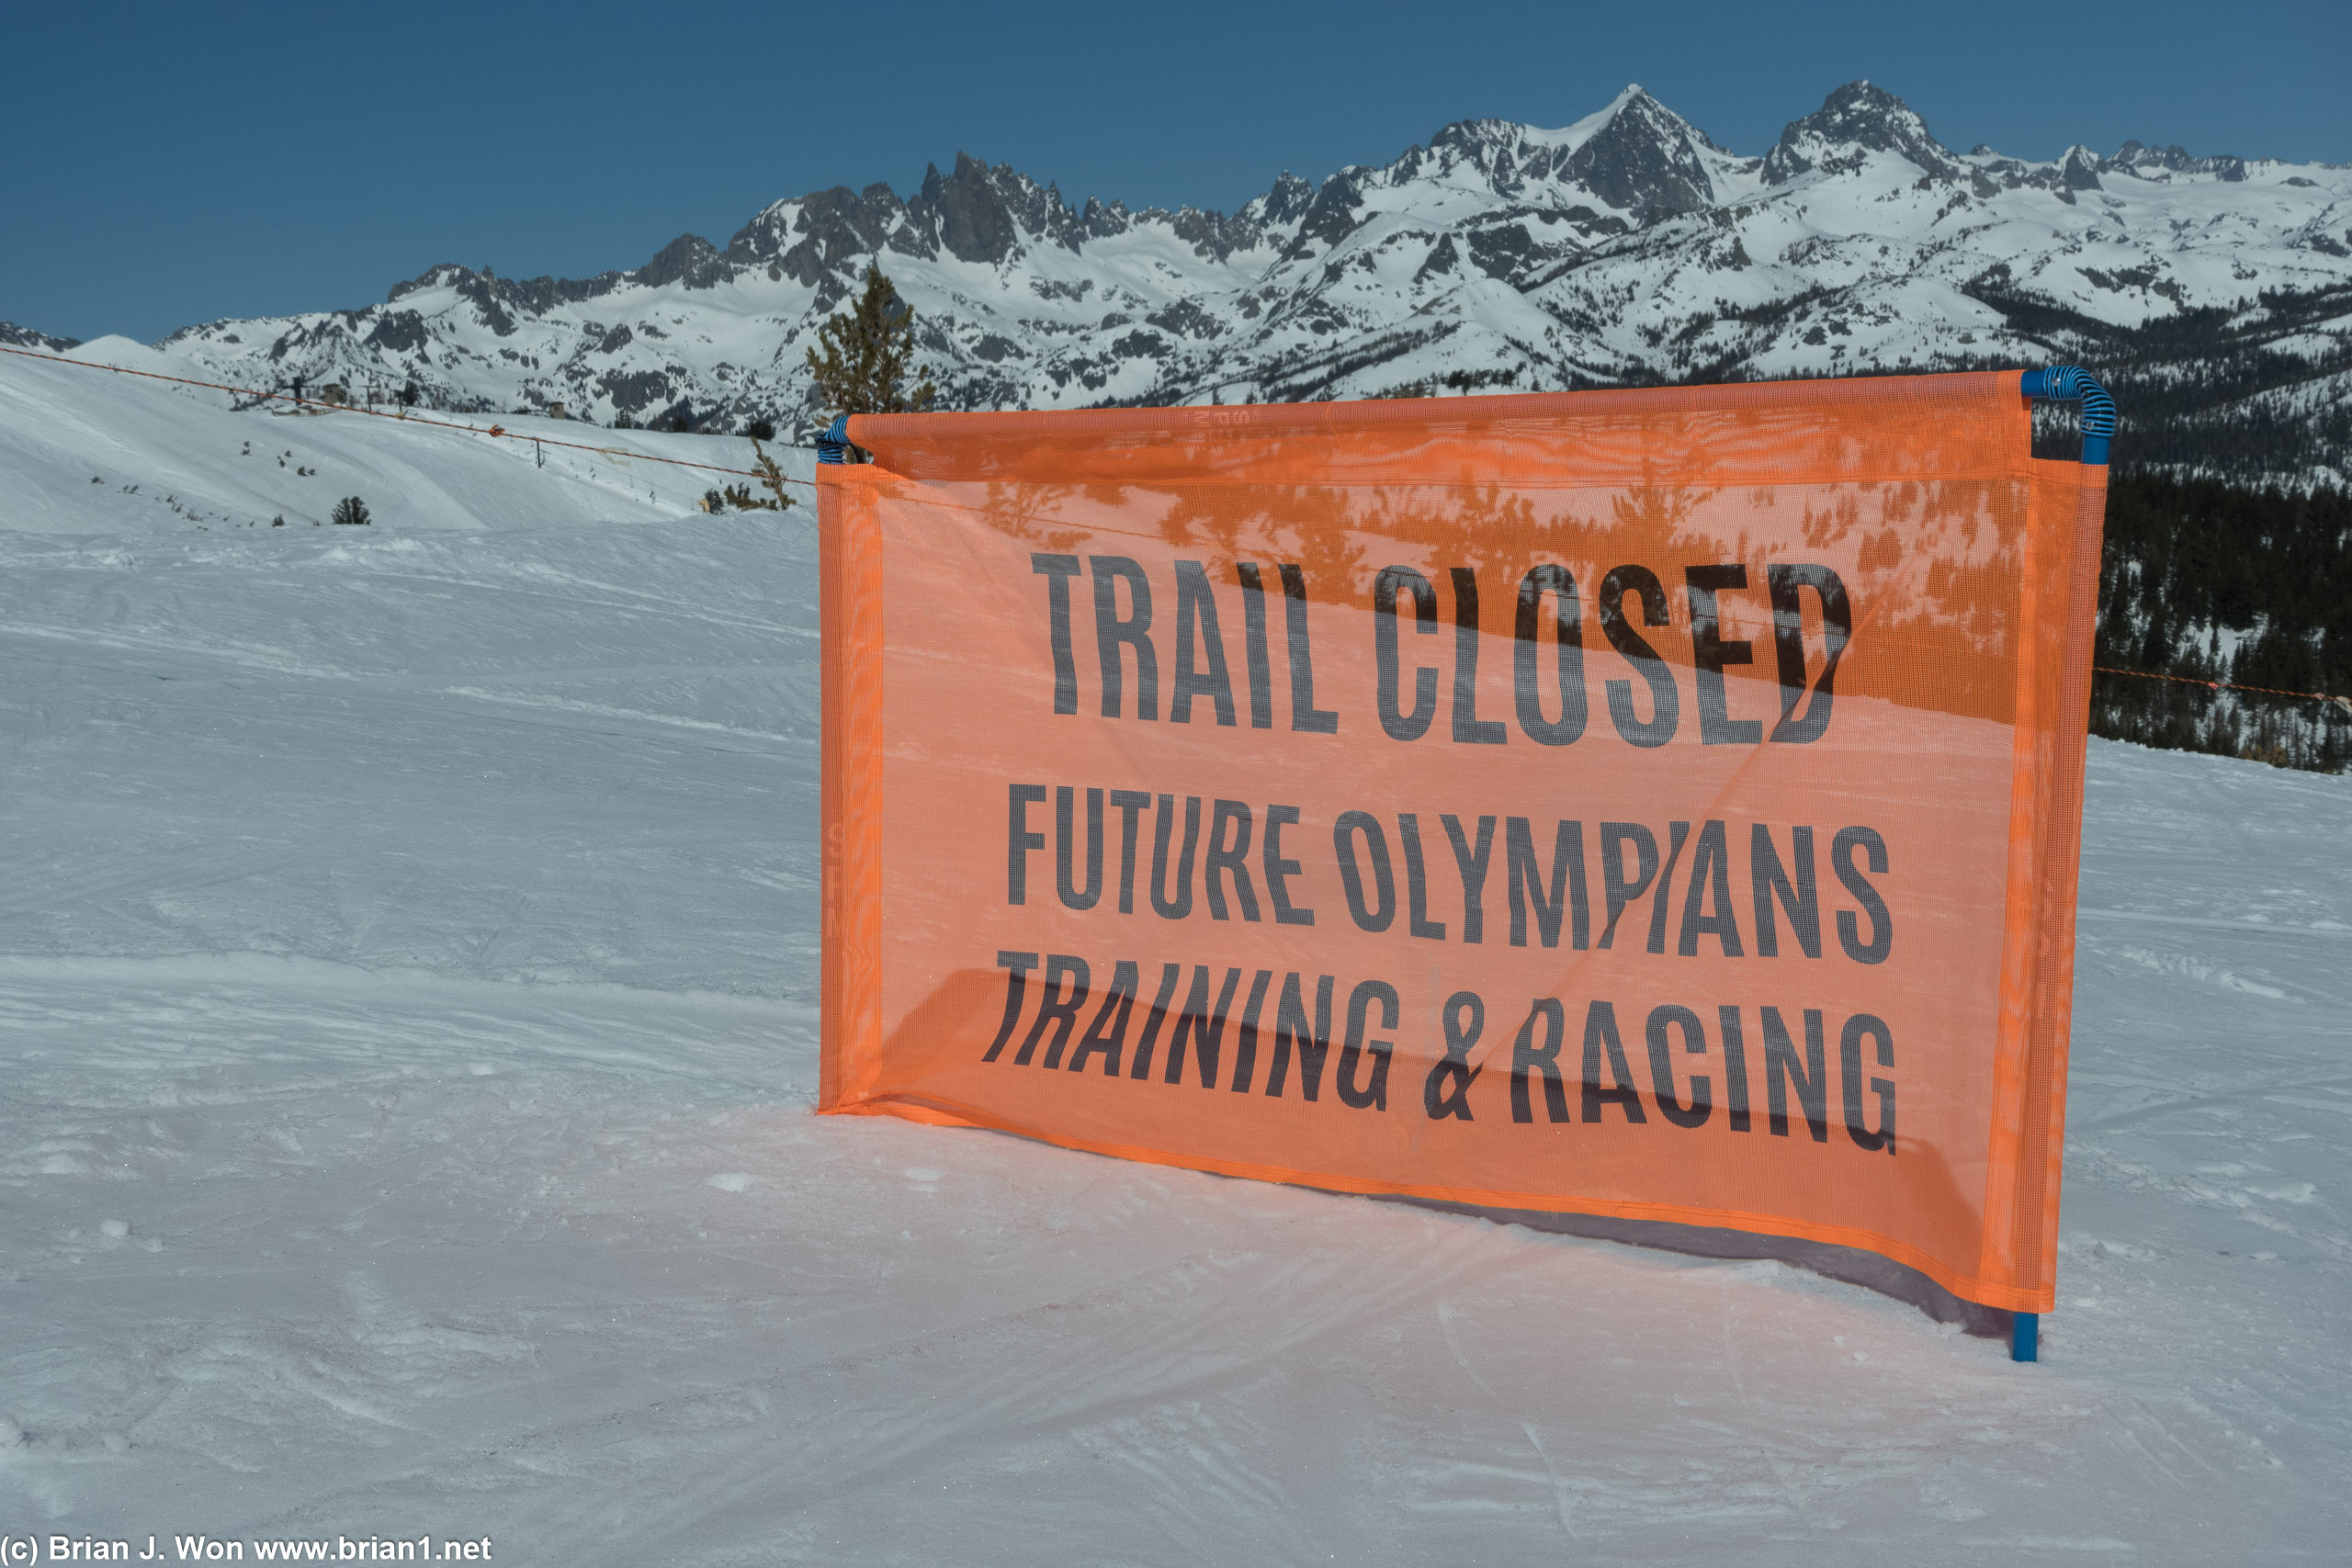 Trail closed: Future Olympians training and racing.